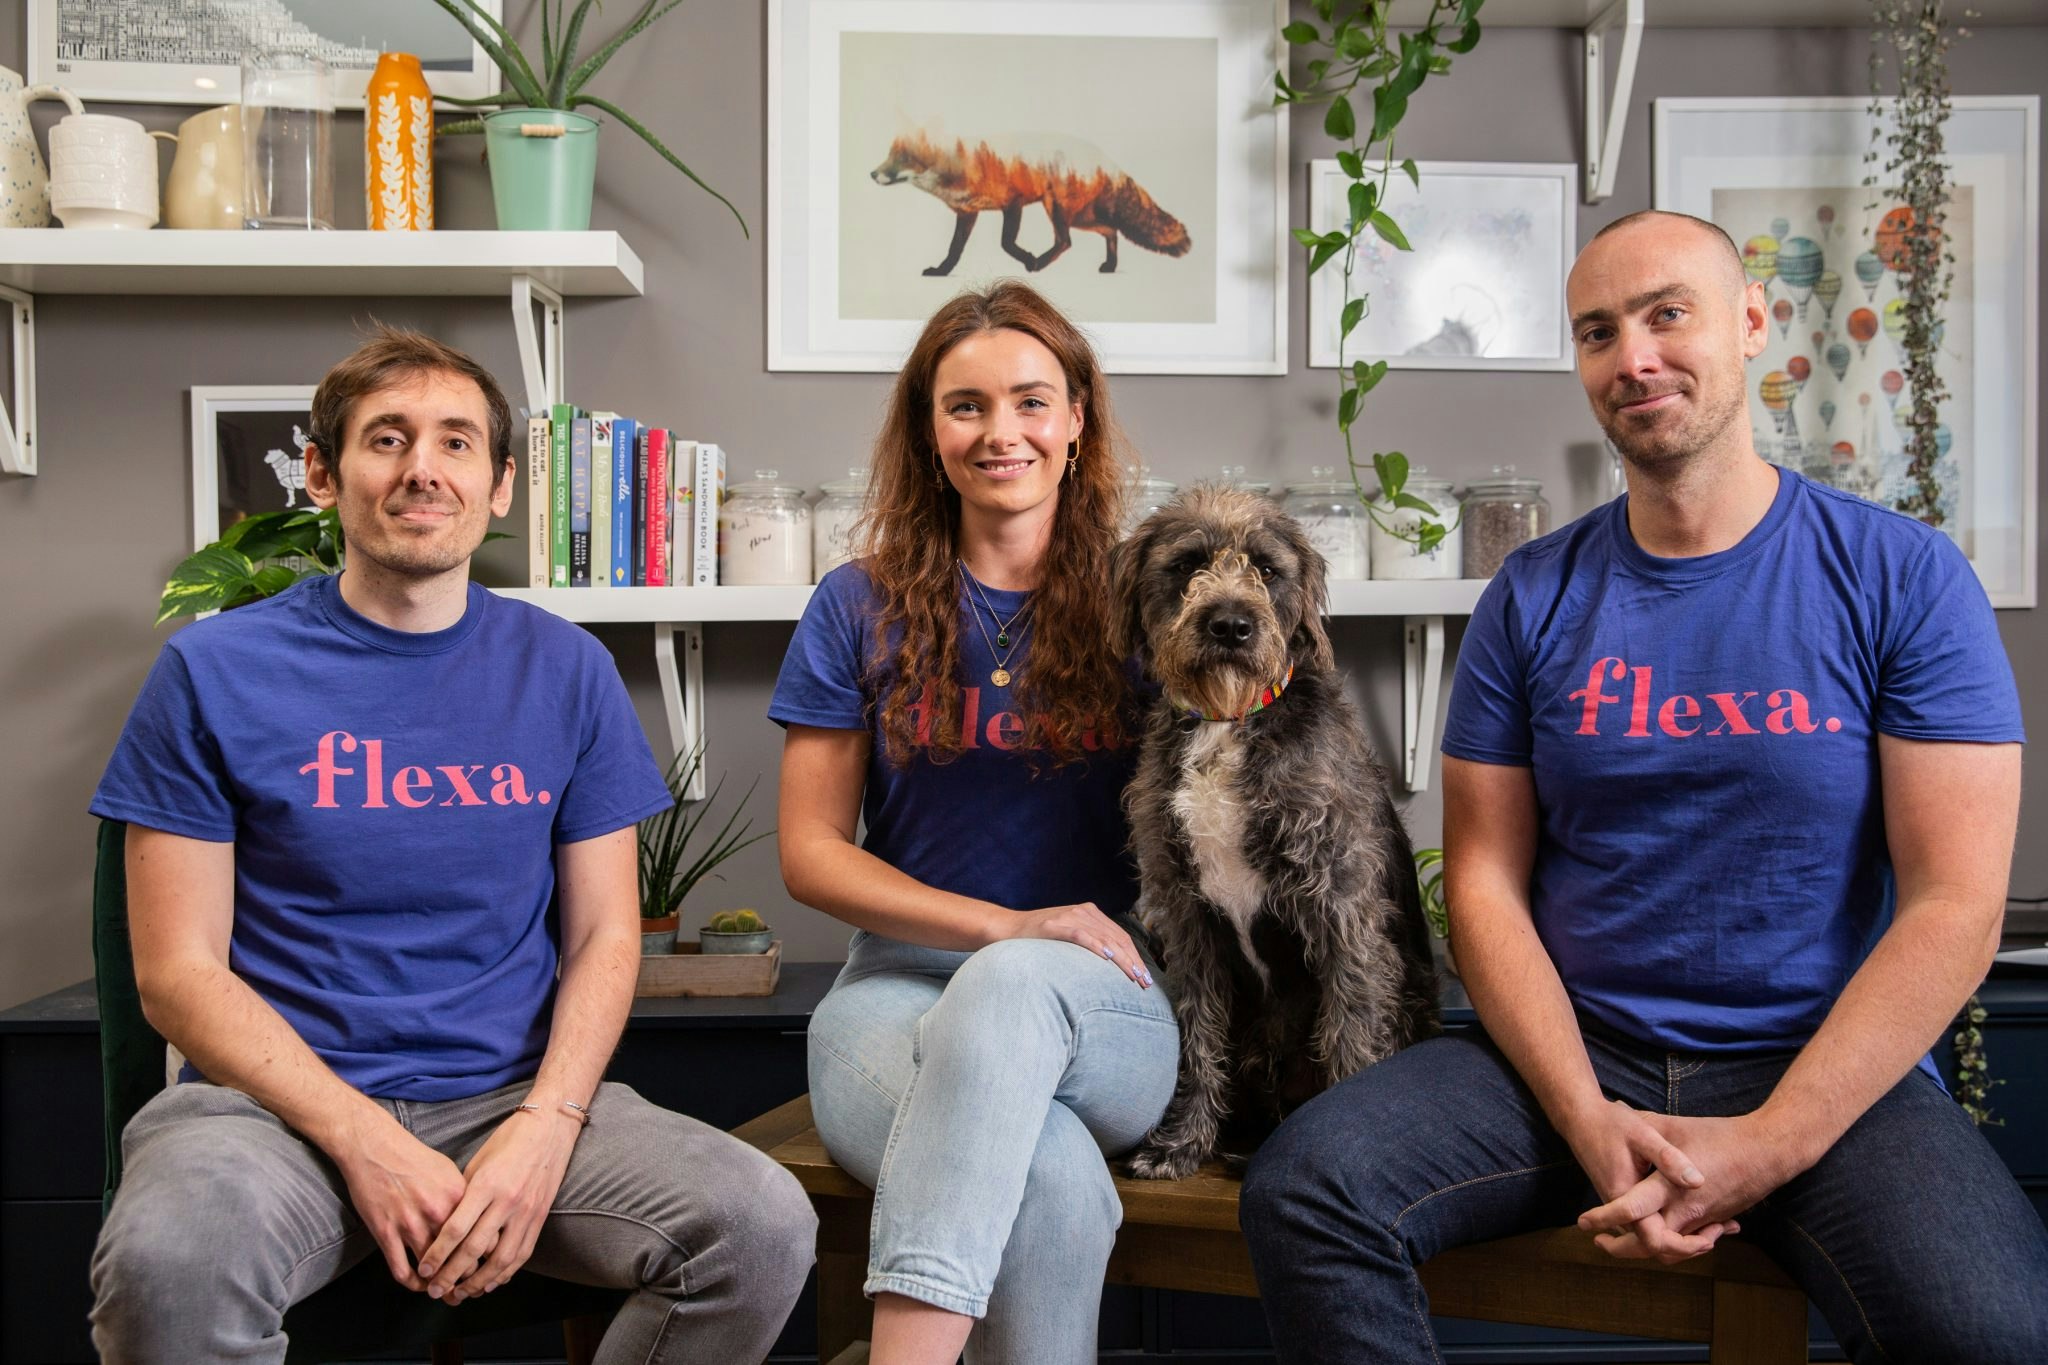 From left to right: Flexa's CTO Tim Leppard, CEO Molly Johnson-Jones, Gruff the dog and cofounder Maurice O'Brien